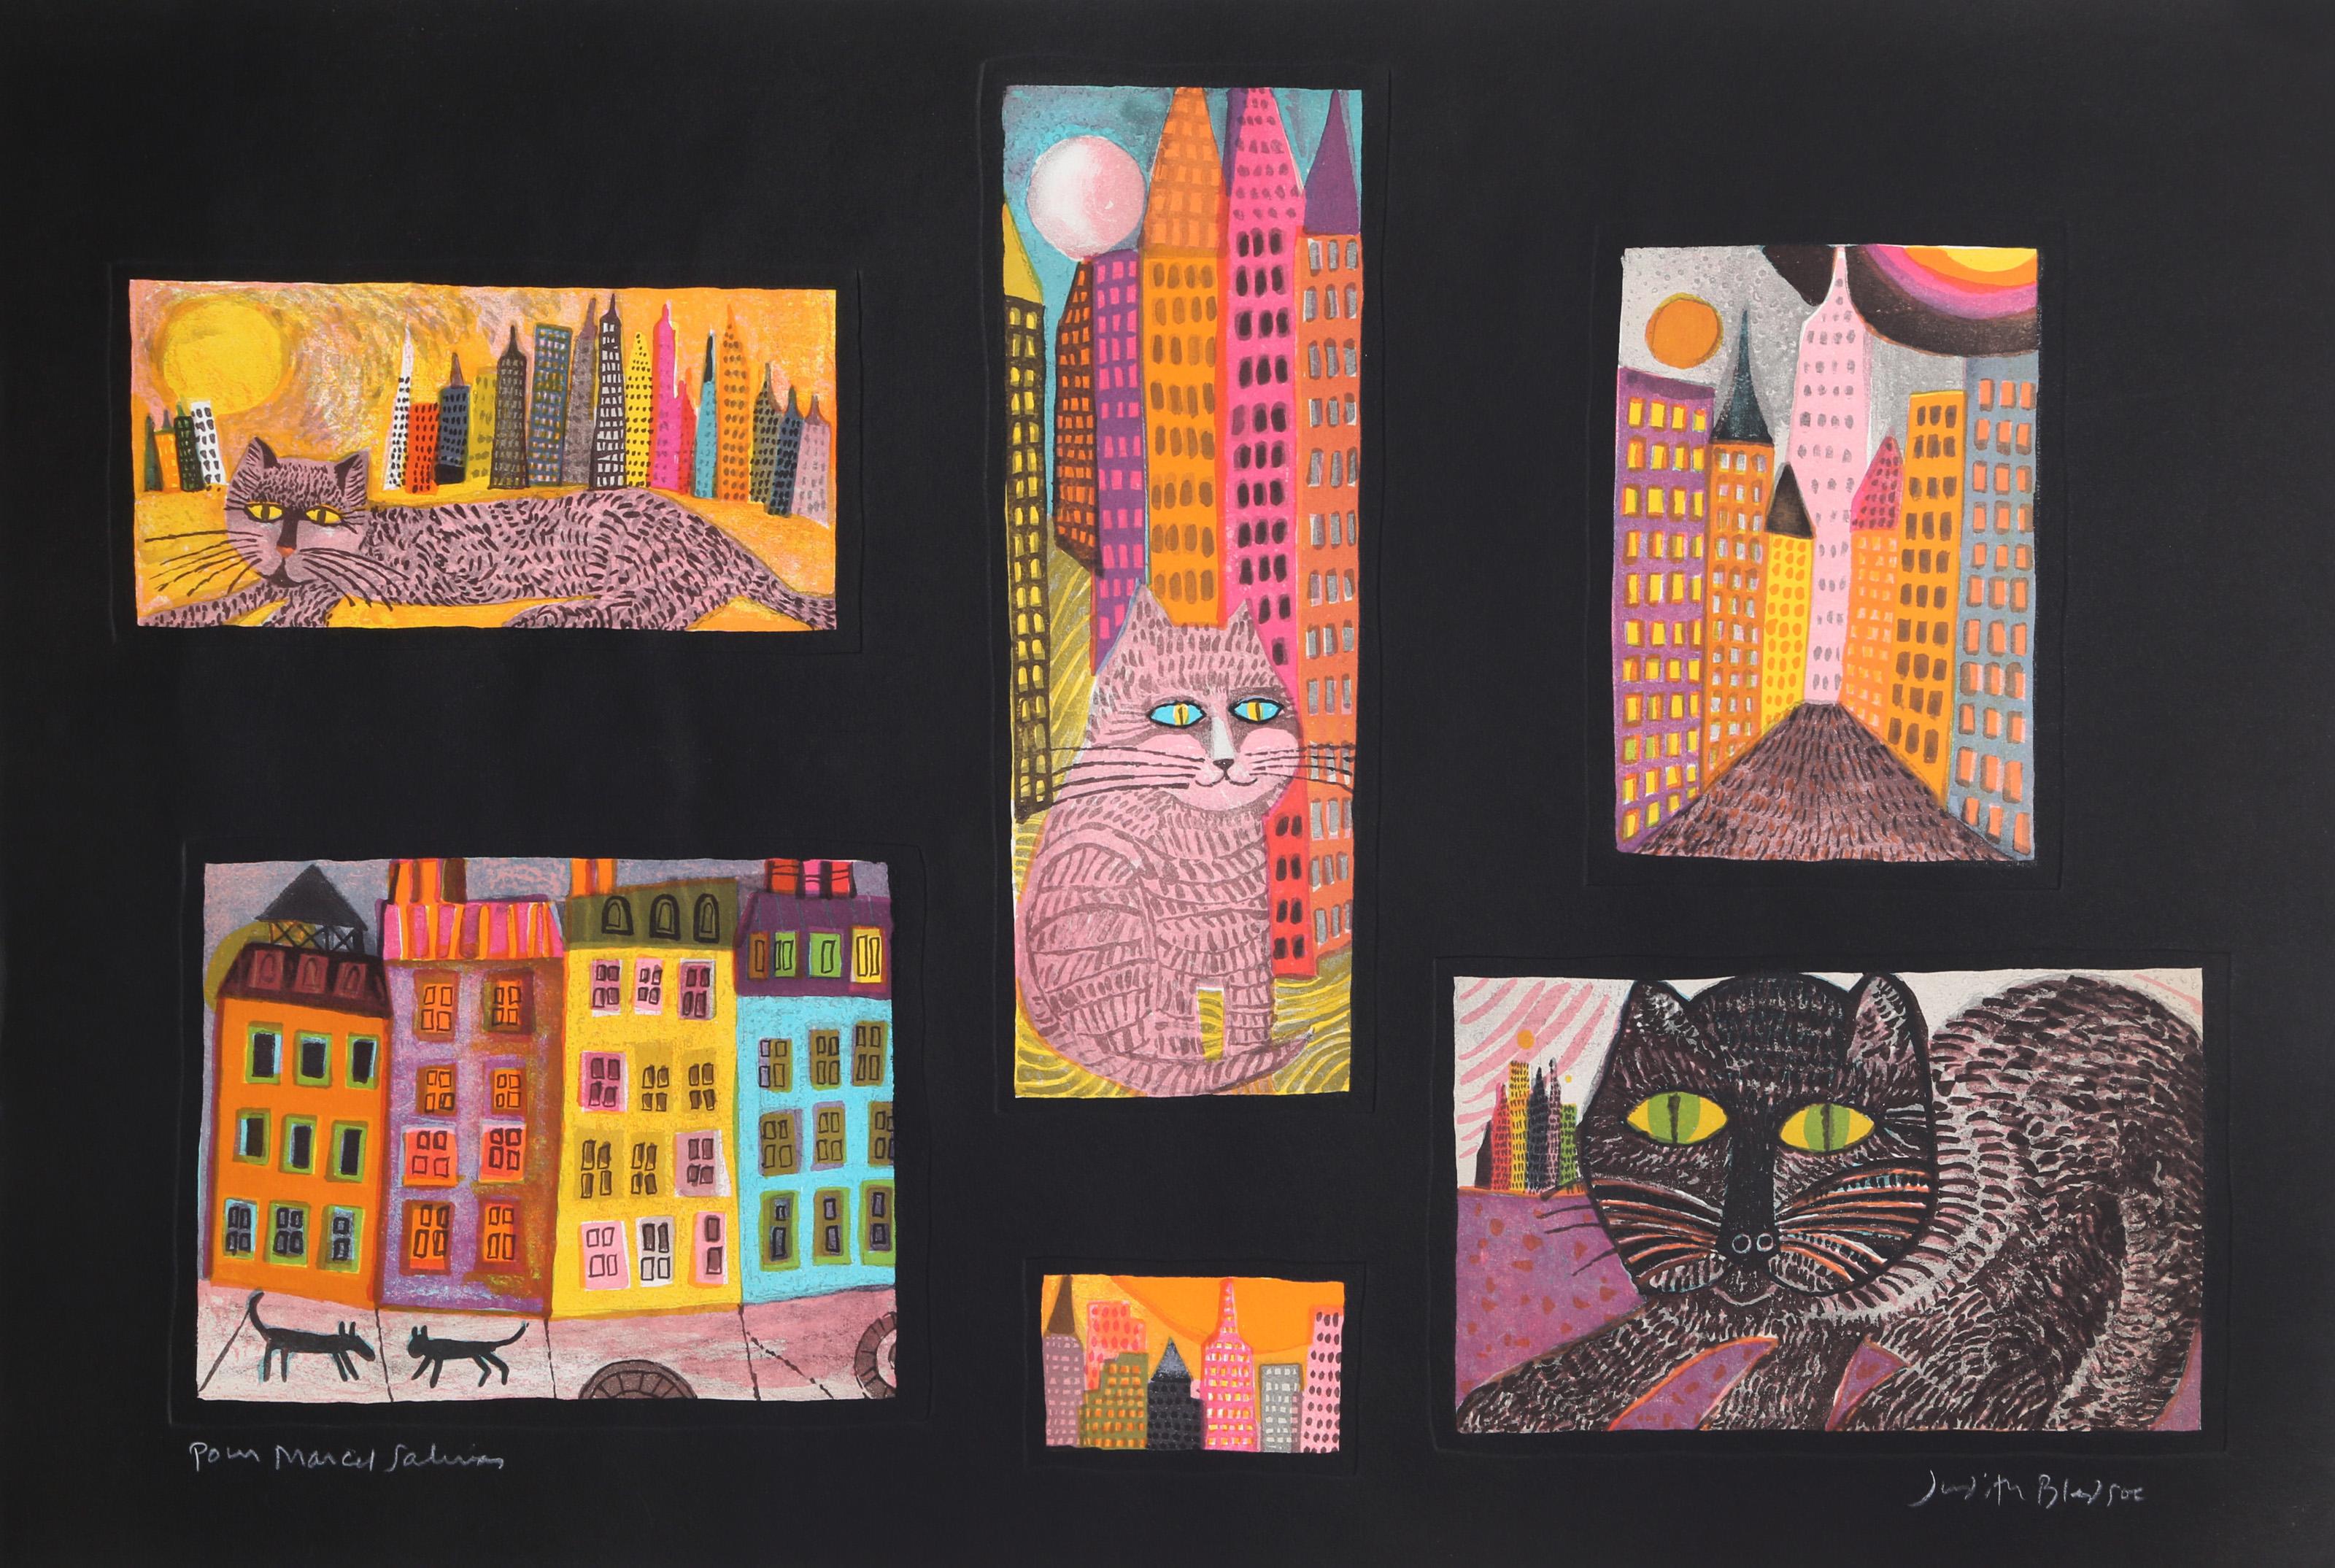 Judith Bledsoe, American (1938 - 2013) -  City Cats. Year: circa 1980, Medium: Lithographs on Black Tinted Paper, signed and dedicated in pencil, Edition: EA, Size: 24  x 35 in. (60.96  x 88.9 cm), Description: In this unique six-paneled